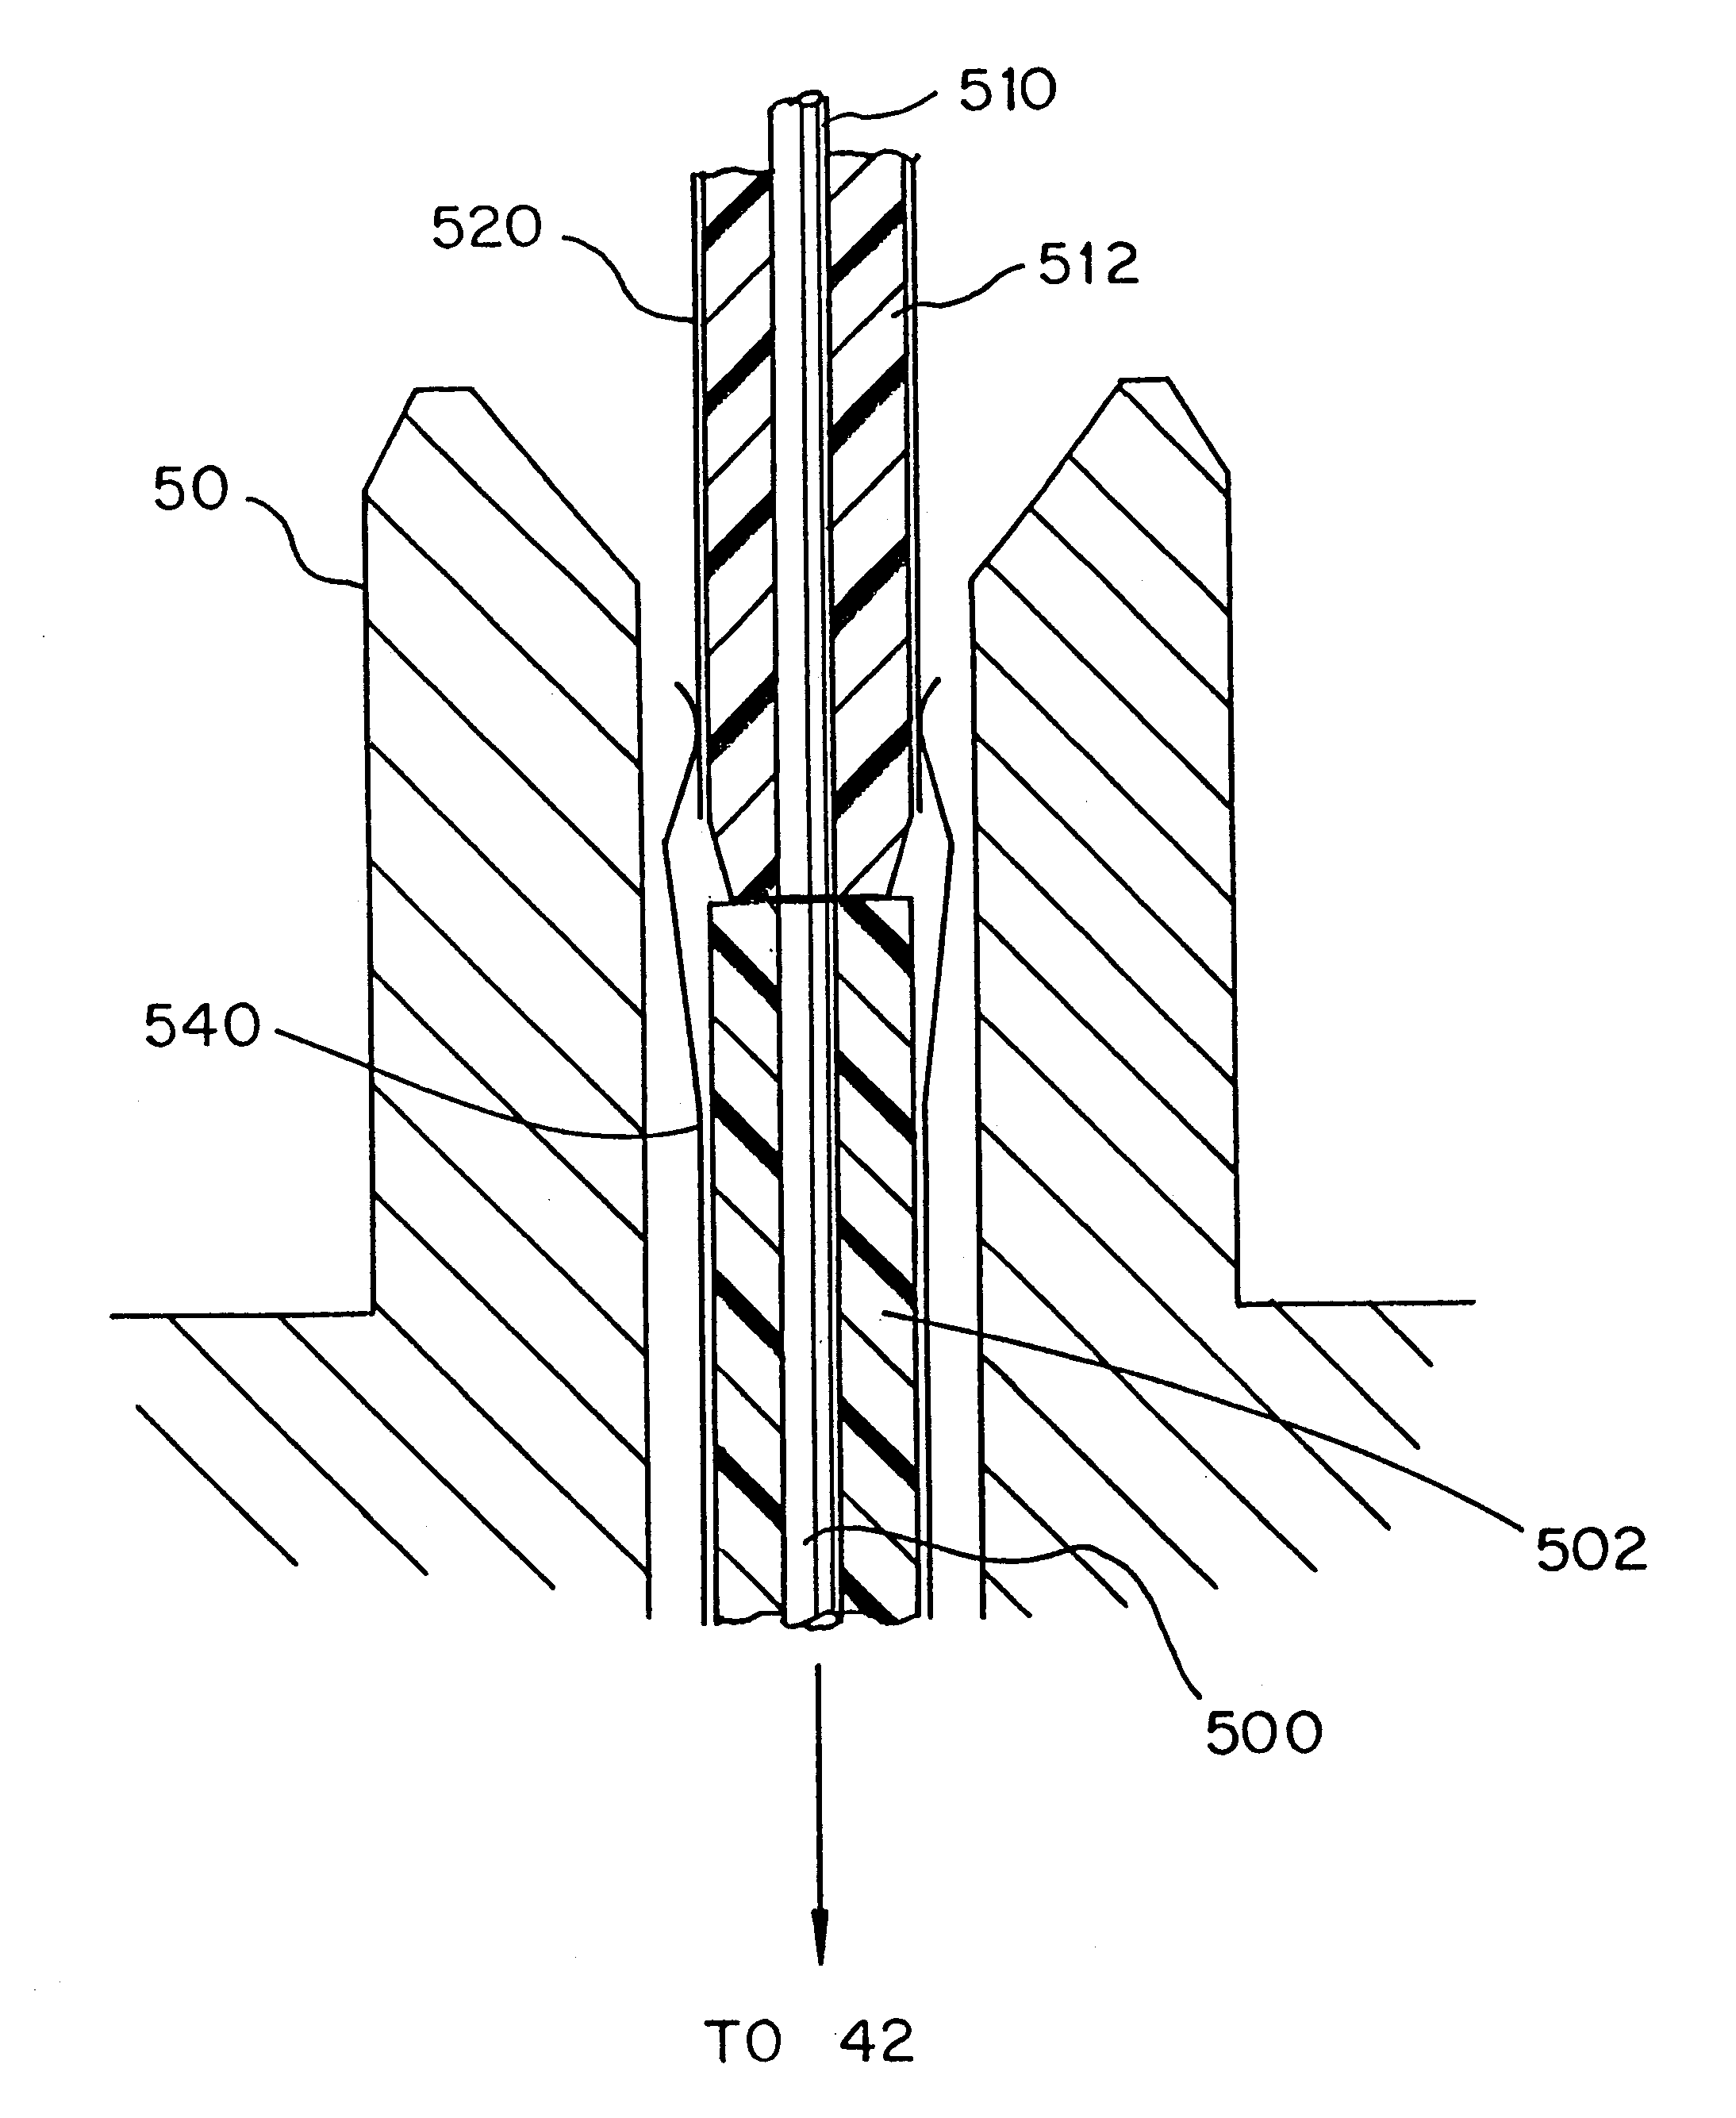 High density electrical interconnect system having enhanced grounding and cross-talk reduction capability